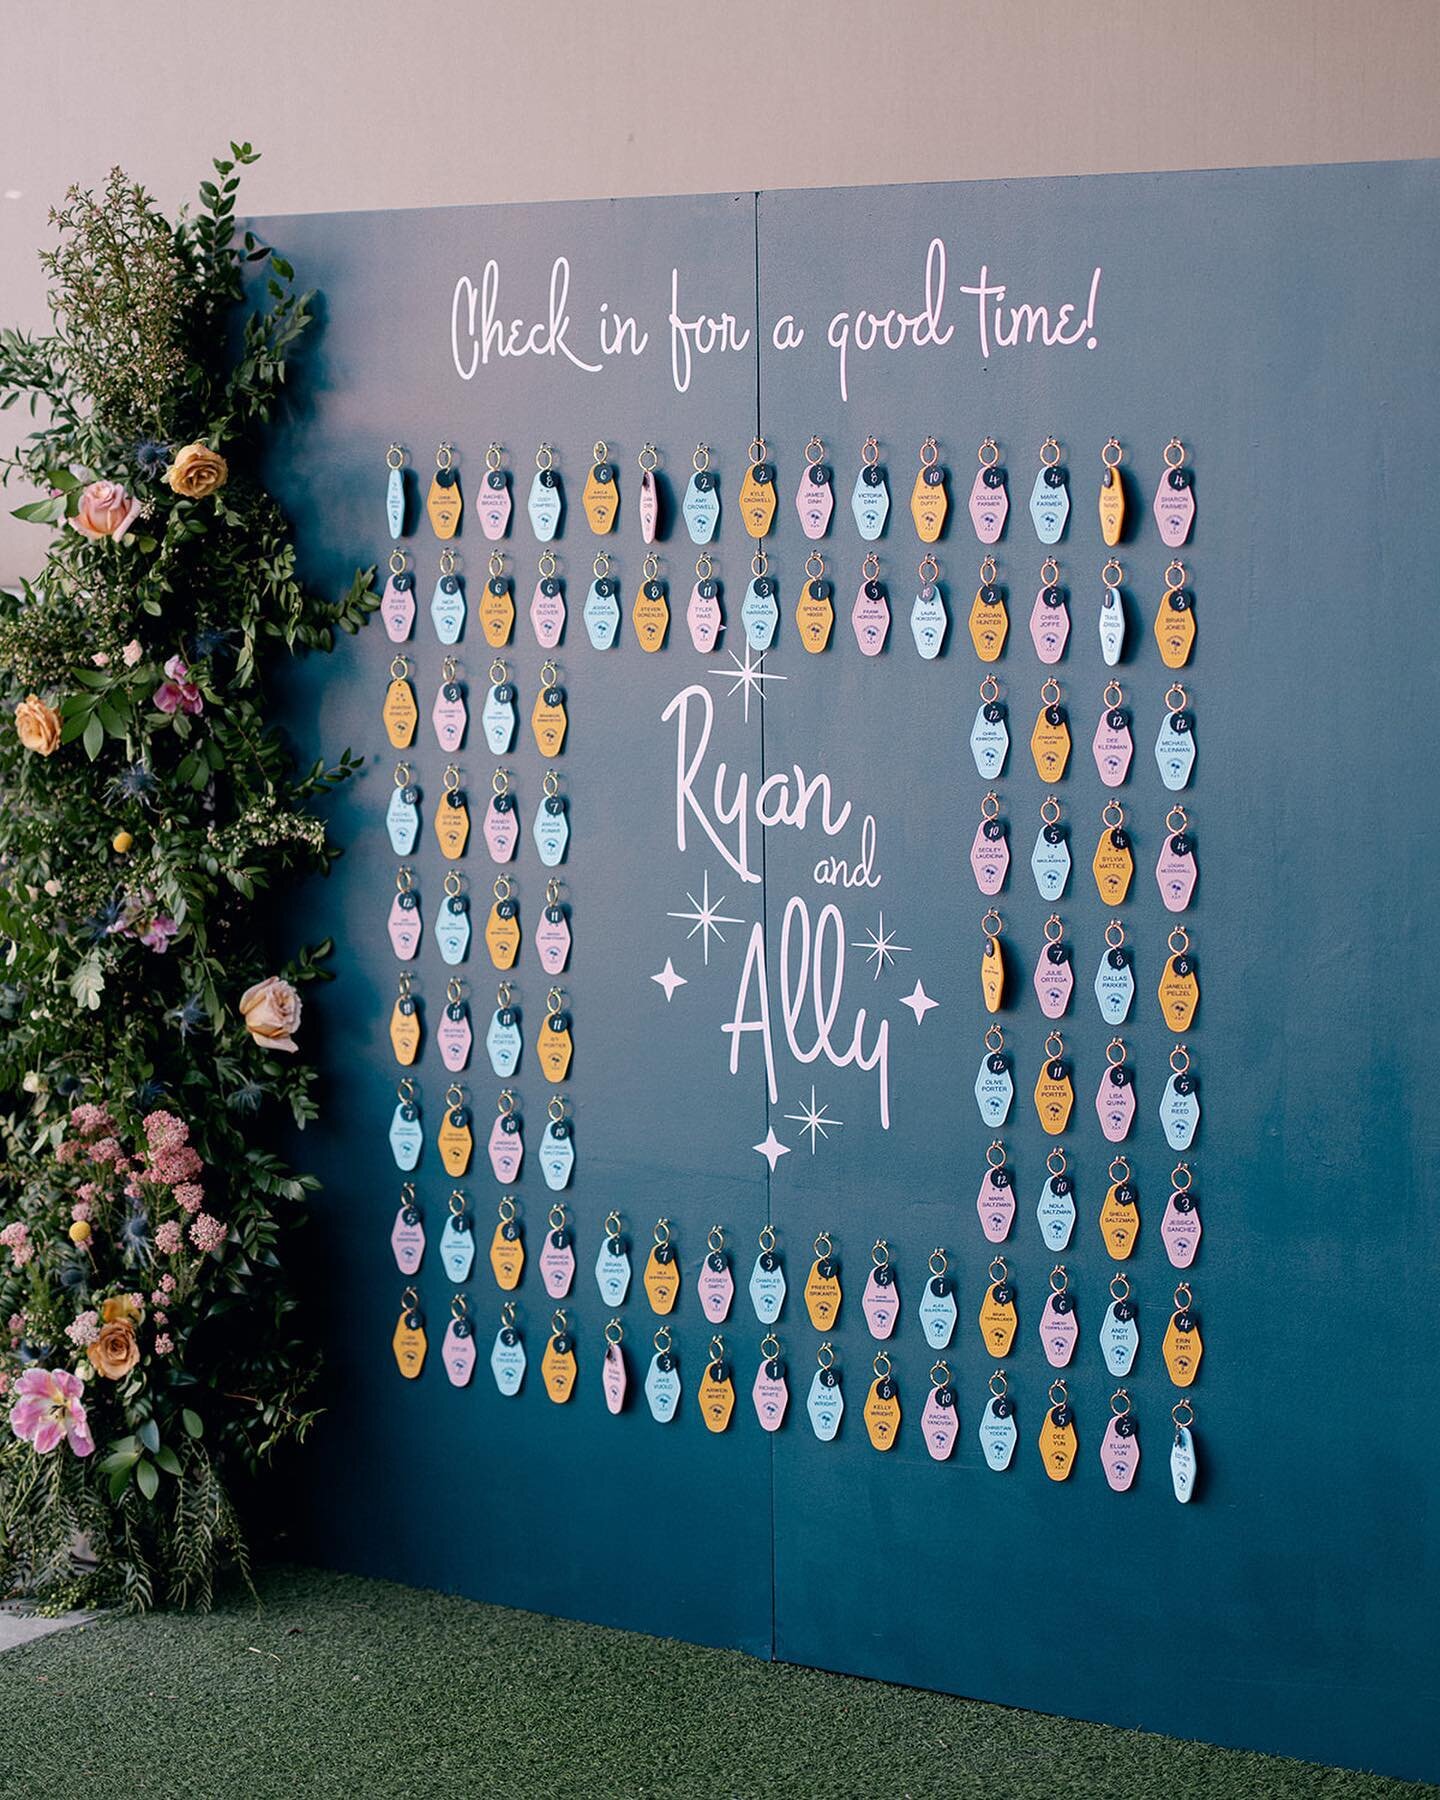 The &ldquo;key&rdquo; to a good time is a fun (and always alphabetized!) seating experience for guests! Loved how this turned out! .
.
.
.
.

Venue @avalonhotels 
Planning and Design @michellegaribayevents
Photography @jennyquicksall 
Custom wall @ba